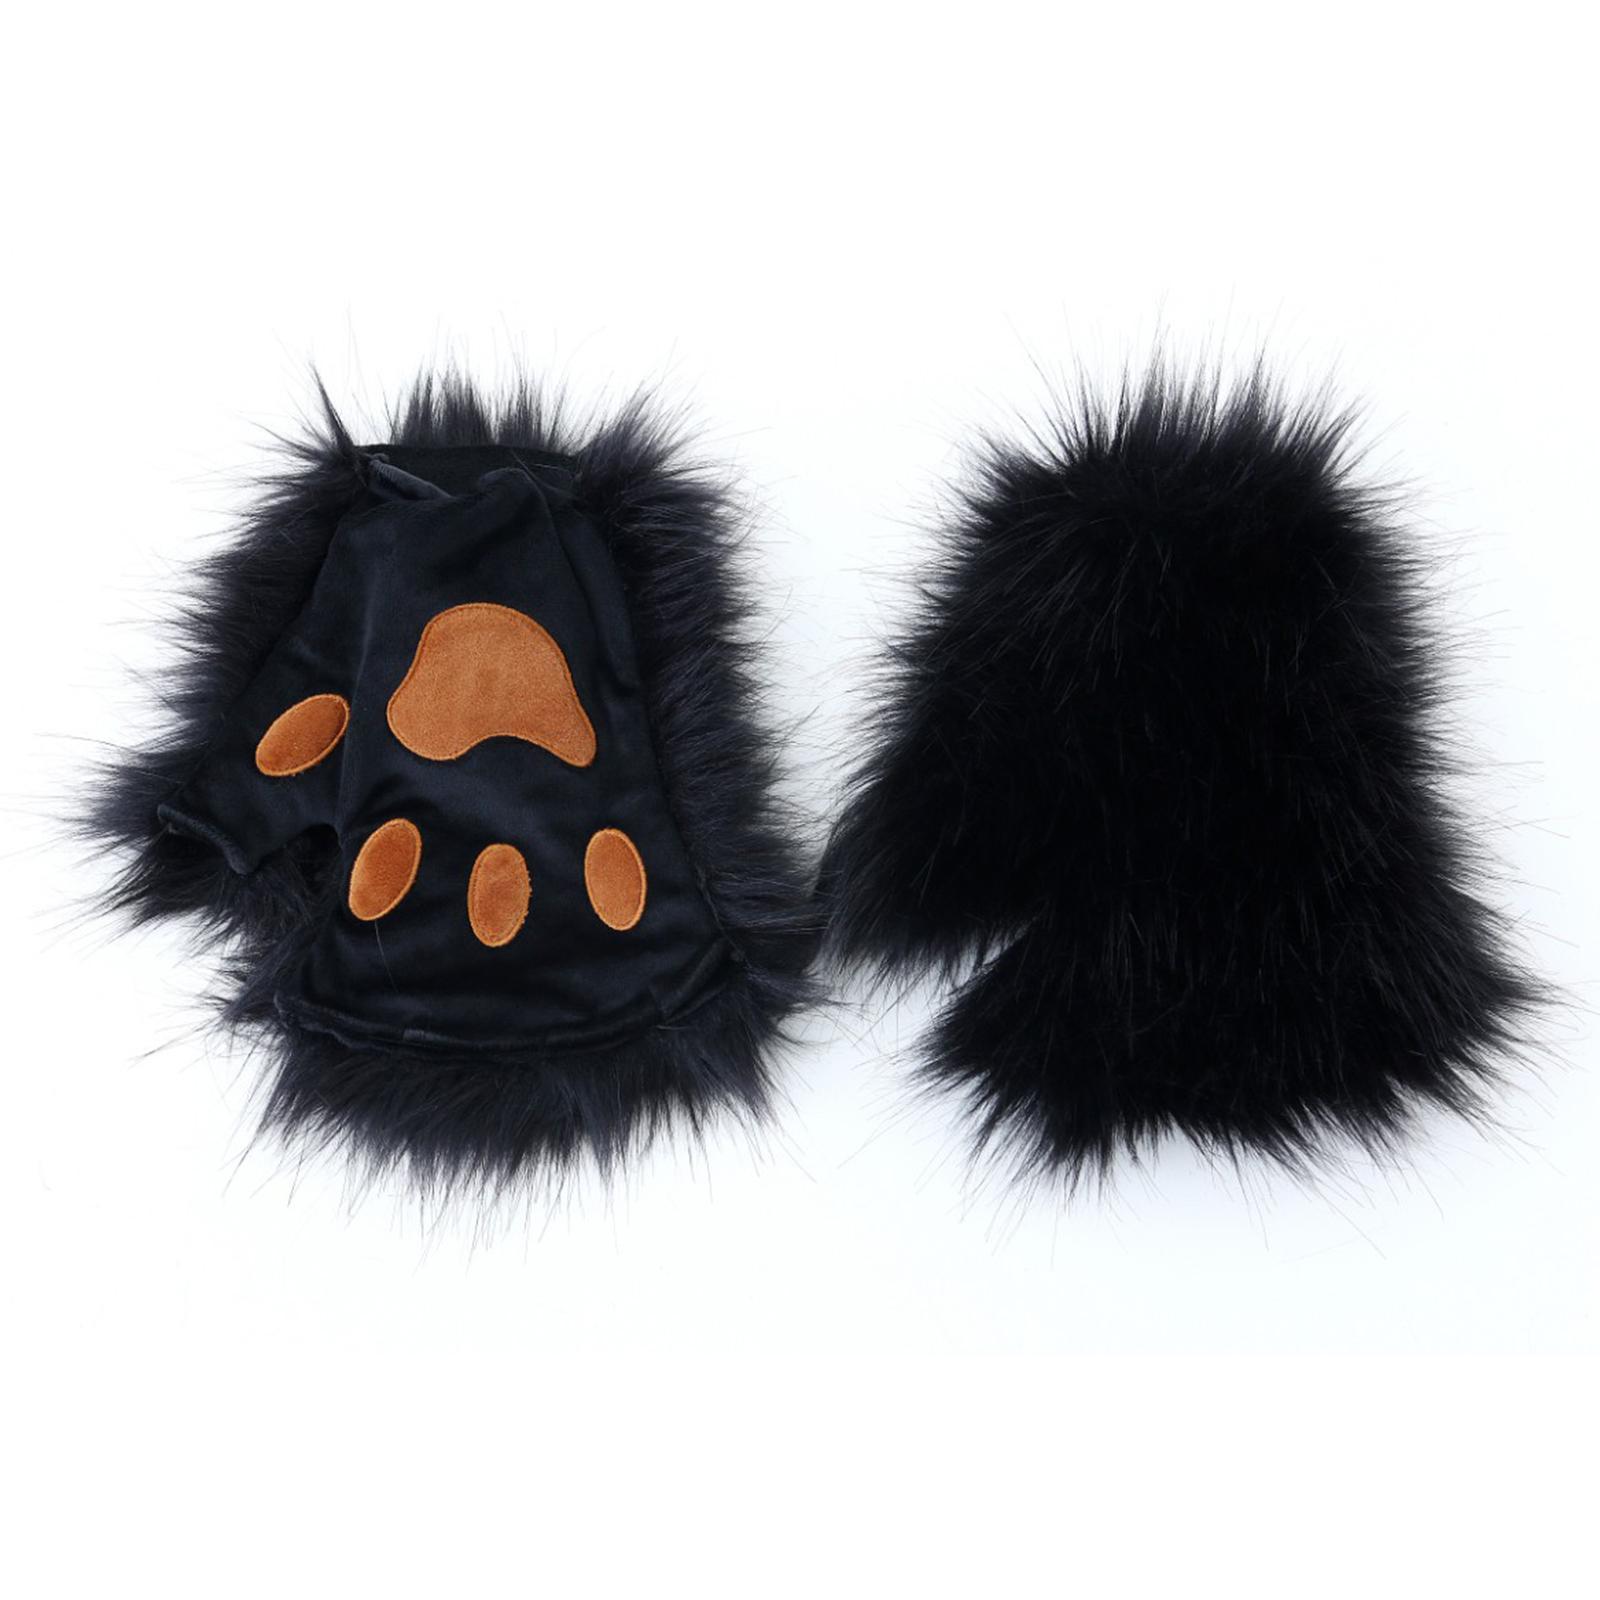 Ears and Tail Cosplay Props, Lolita Hair Accessories Plush